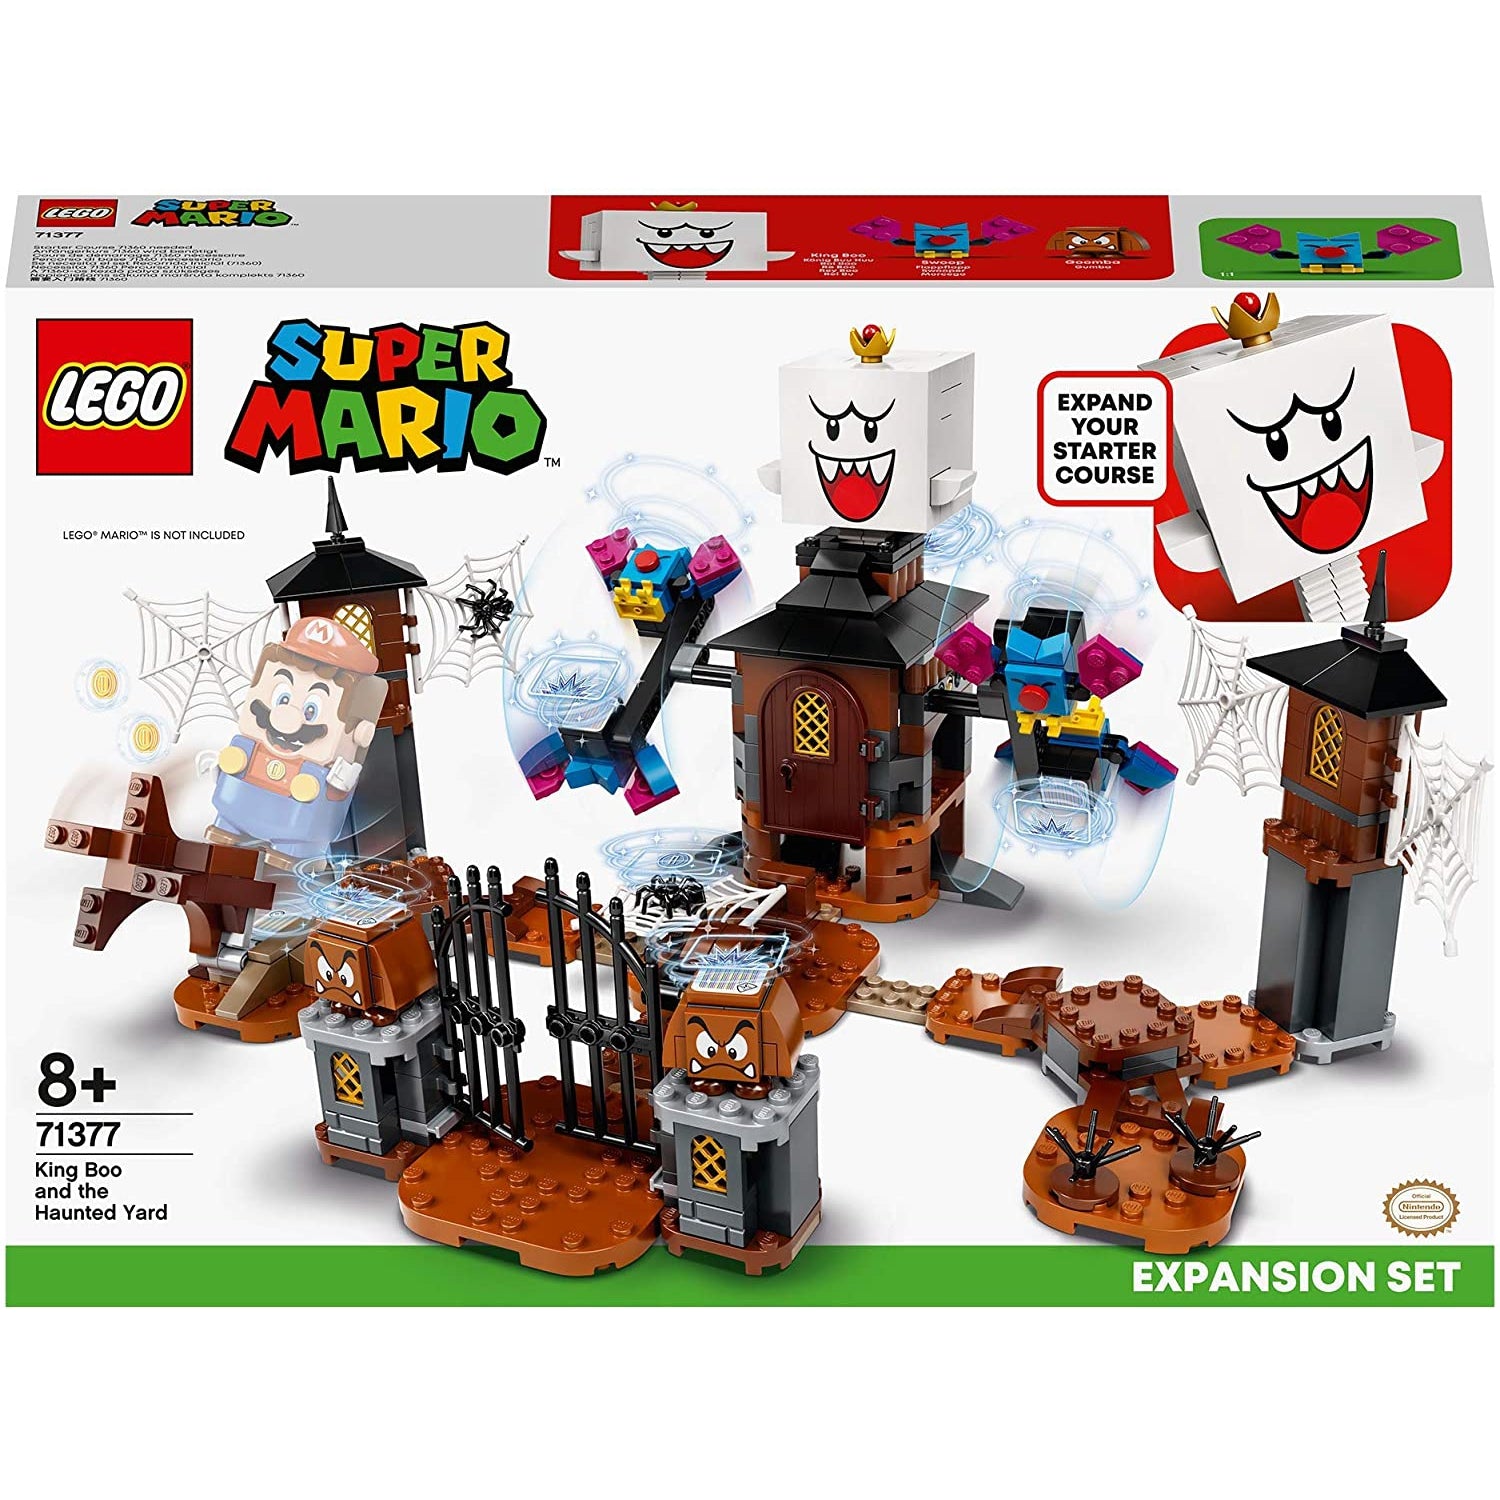 LEGO 71377 King Boo and the Haunted Yard Expansion Set